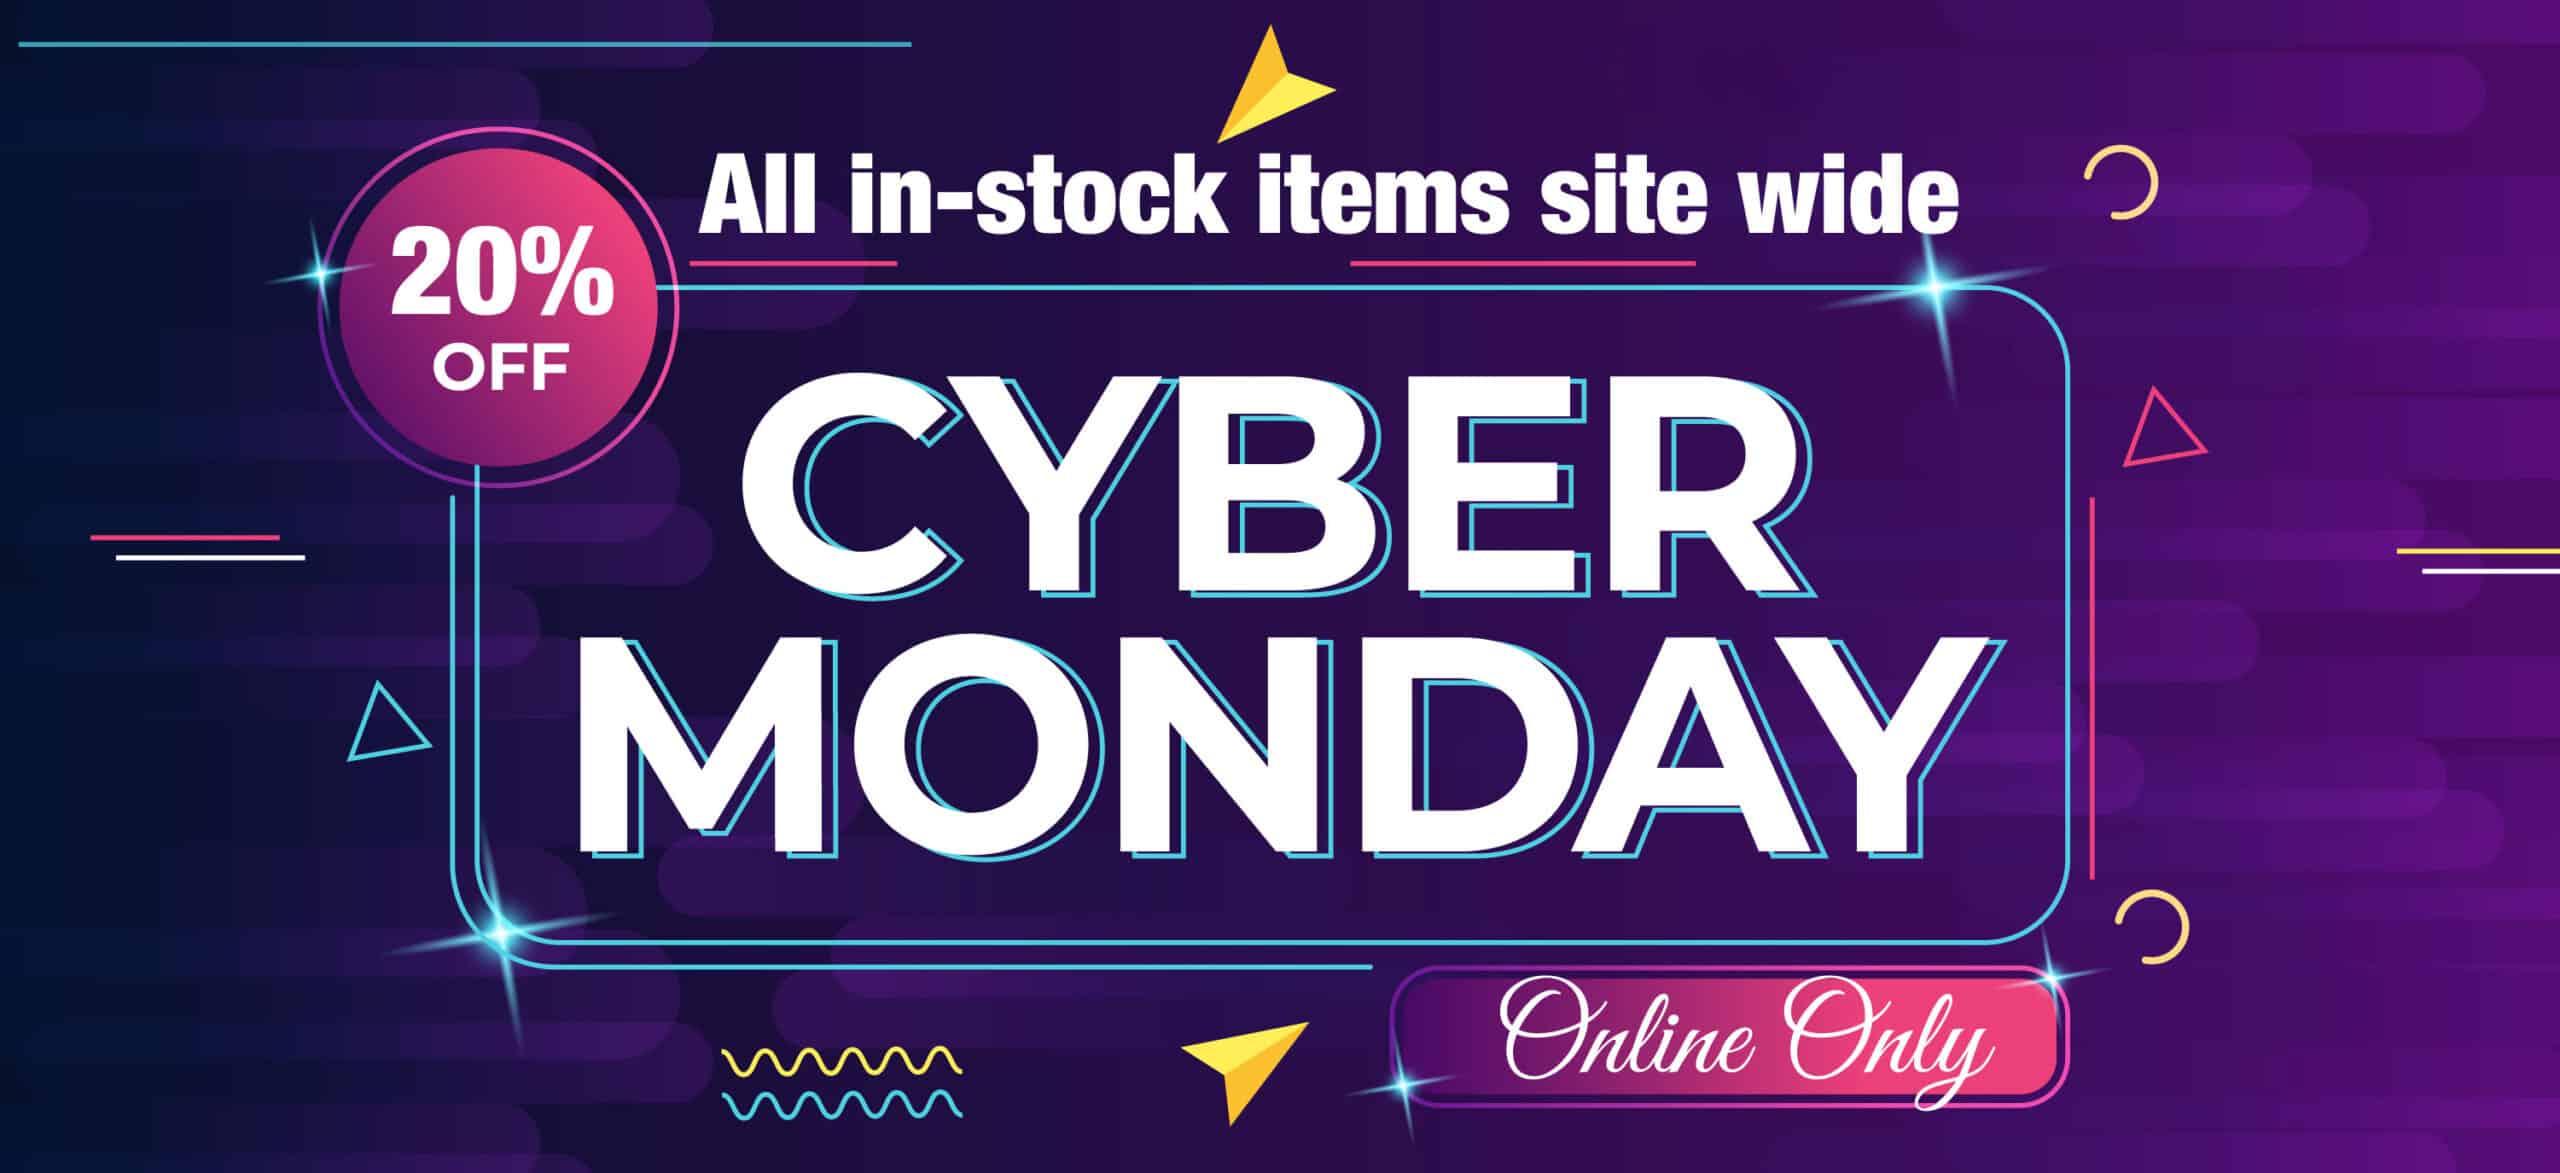 The History of Cyber Monday